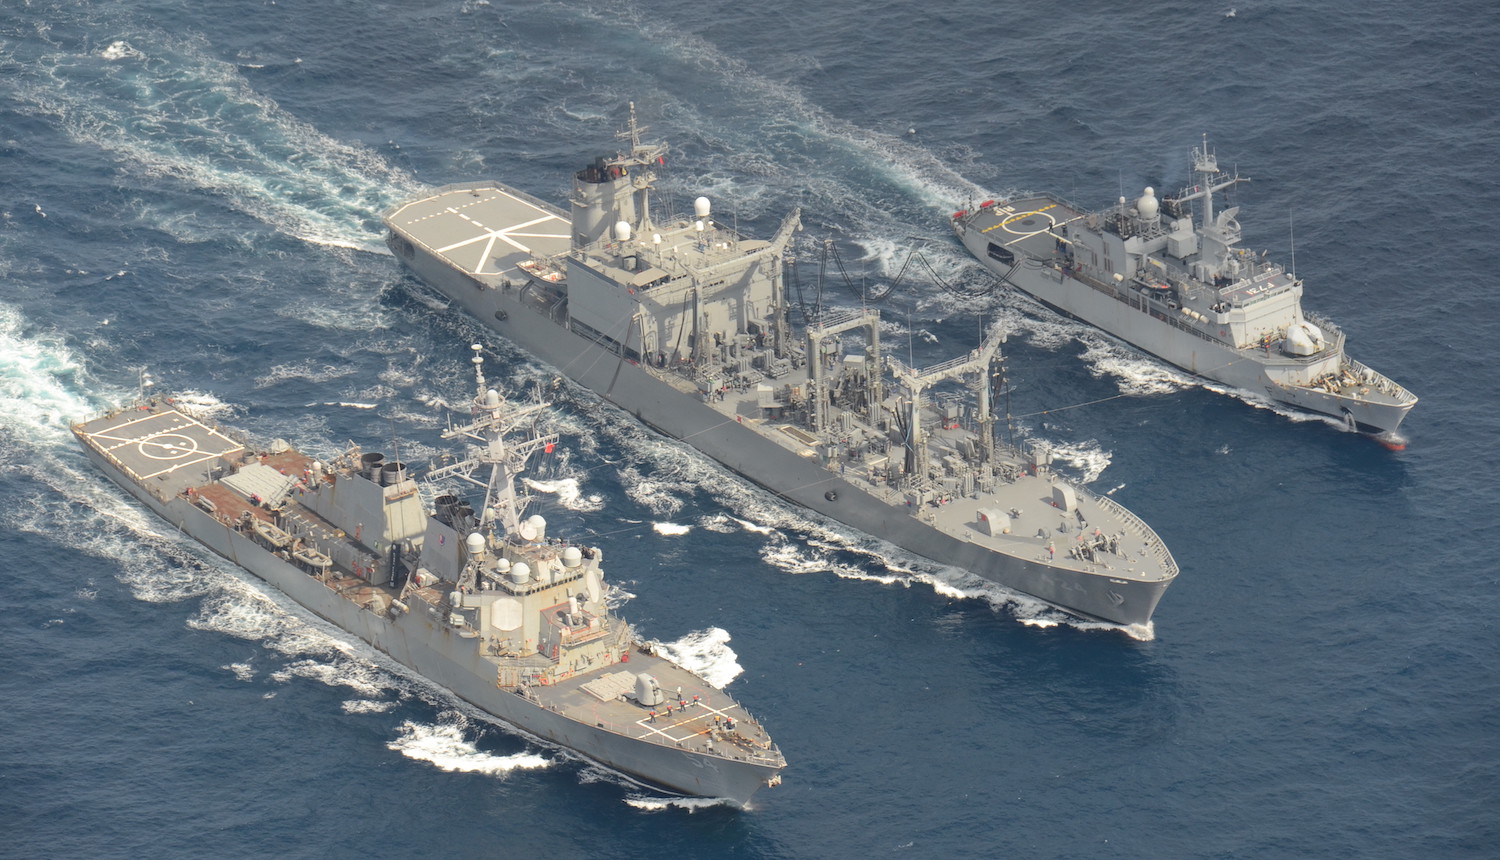 Image of the USS Curtis Wilbur, DDG 54 (left) conducts a replenishment-at-sea with the Japan Maritime Self-Defense Force replenishment ship JS Hamana, AOE 424 (center) and French light frigate FNS Prairial, F731 (right)